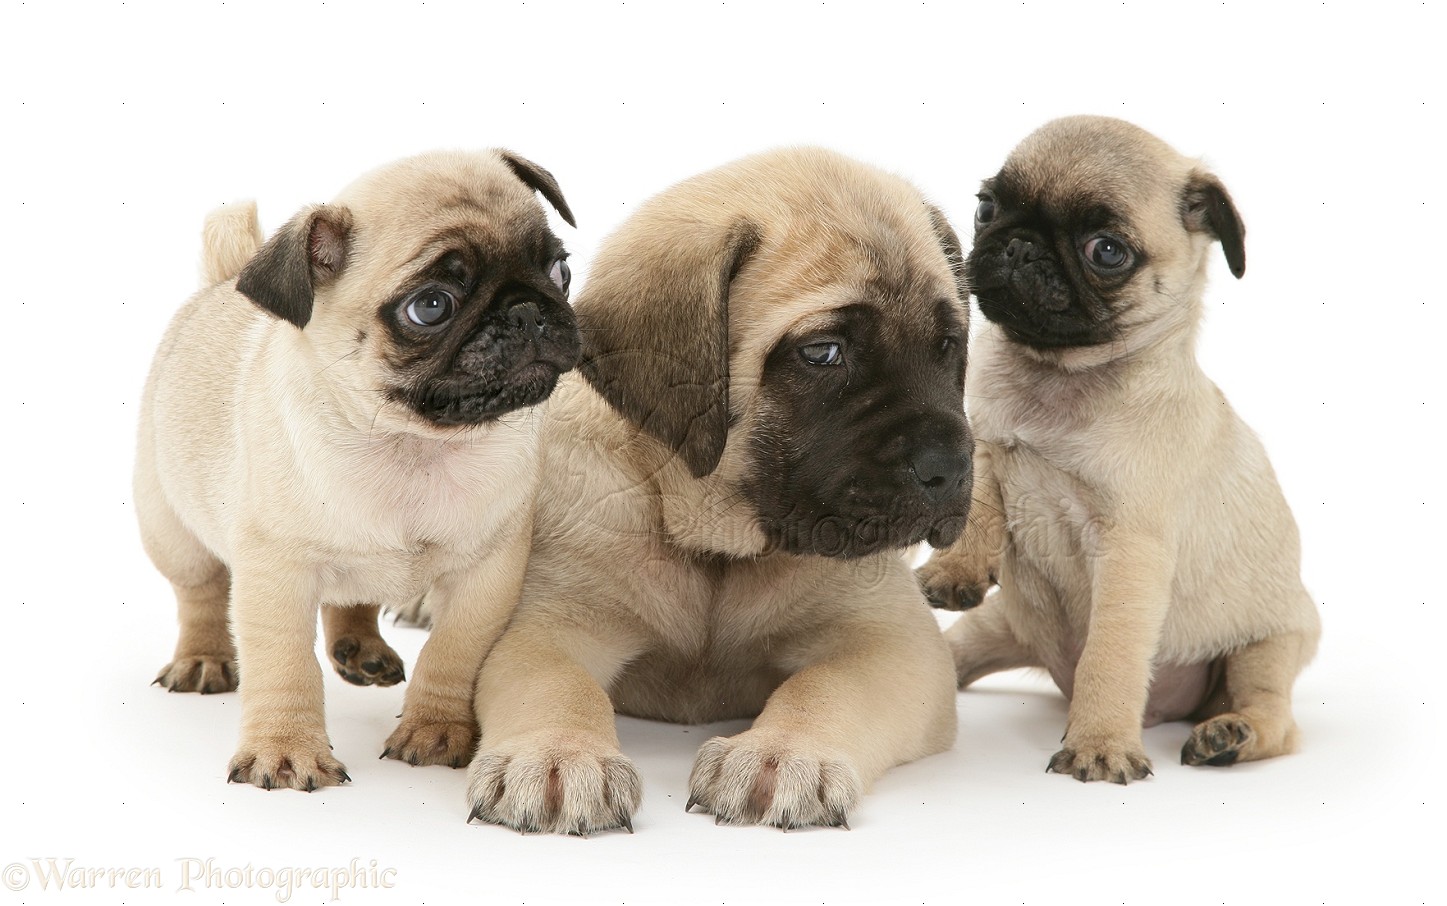 Dogs Fawn Pug Pups With Fawn English Mastiff Pup Photo Wp36633